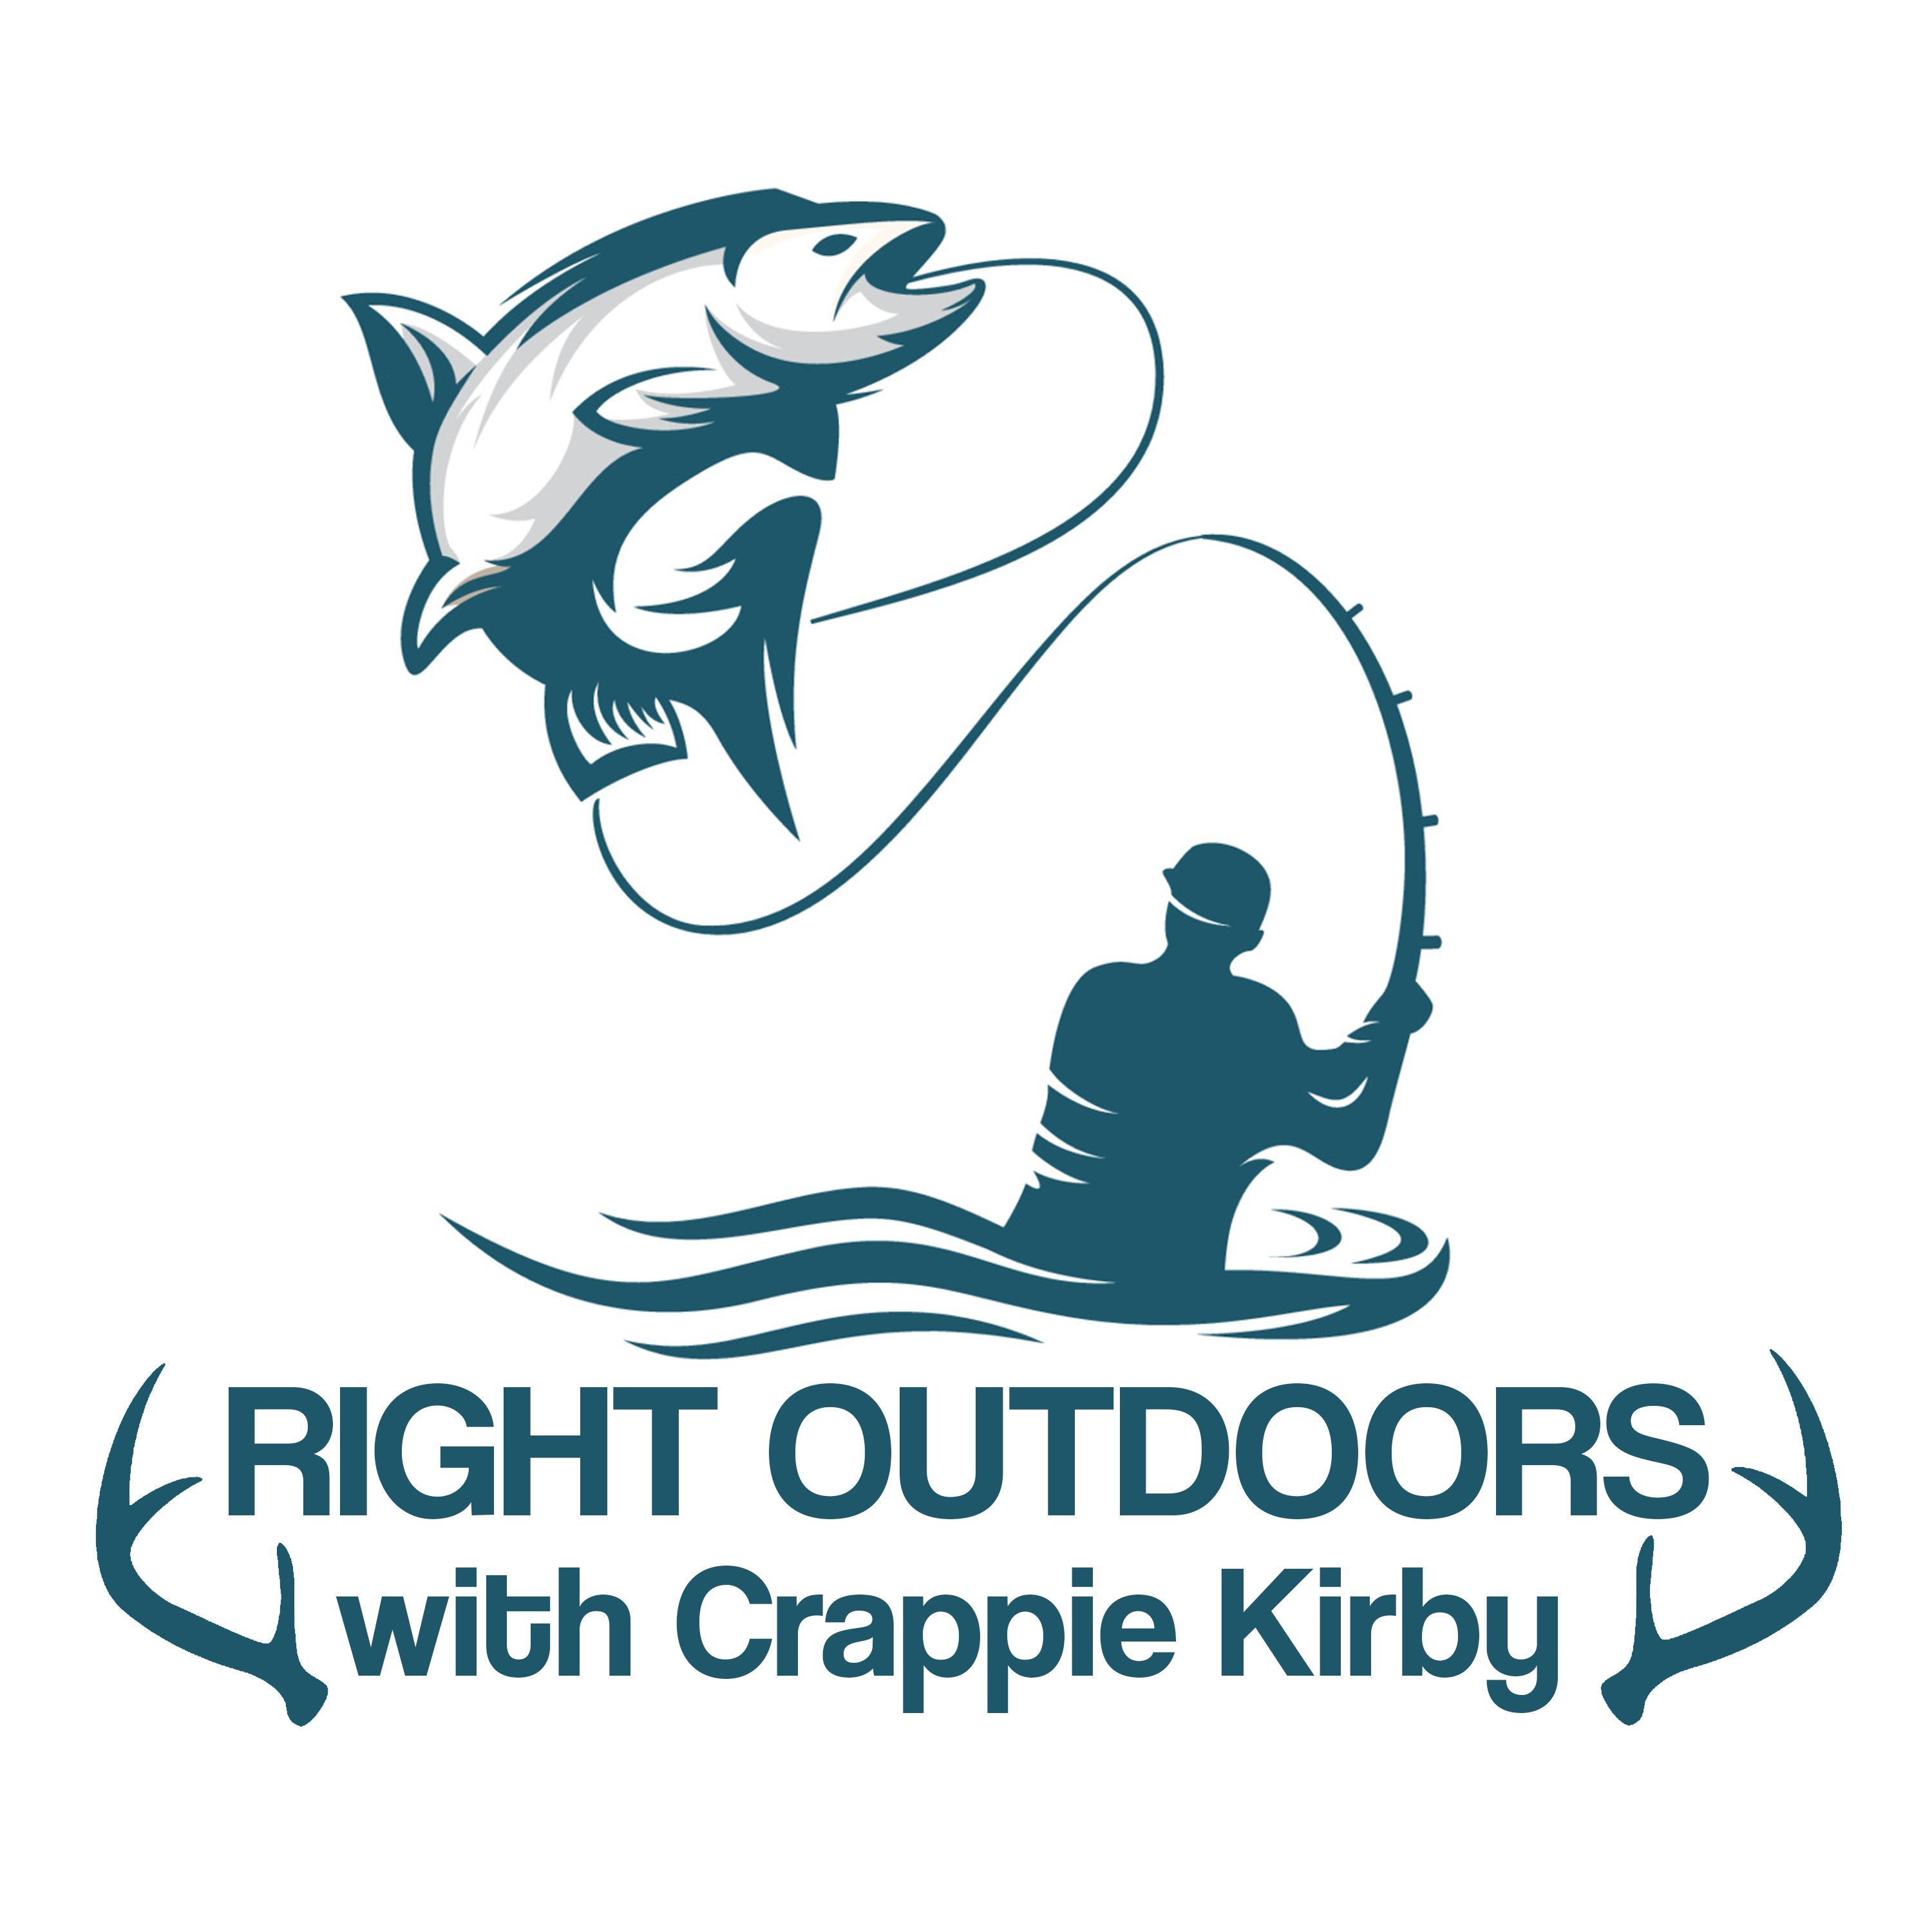 Right Outdoors with Crappie Kirby